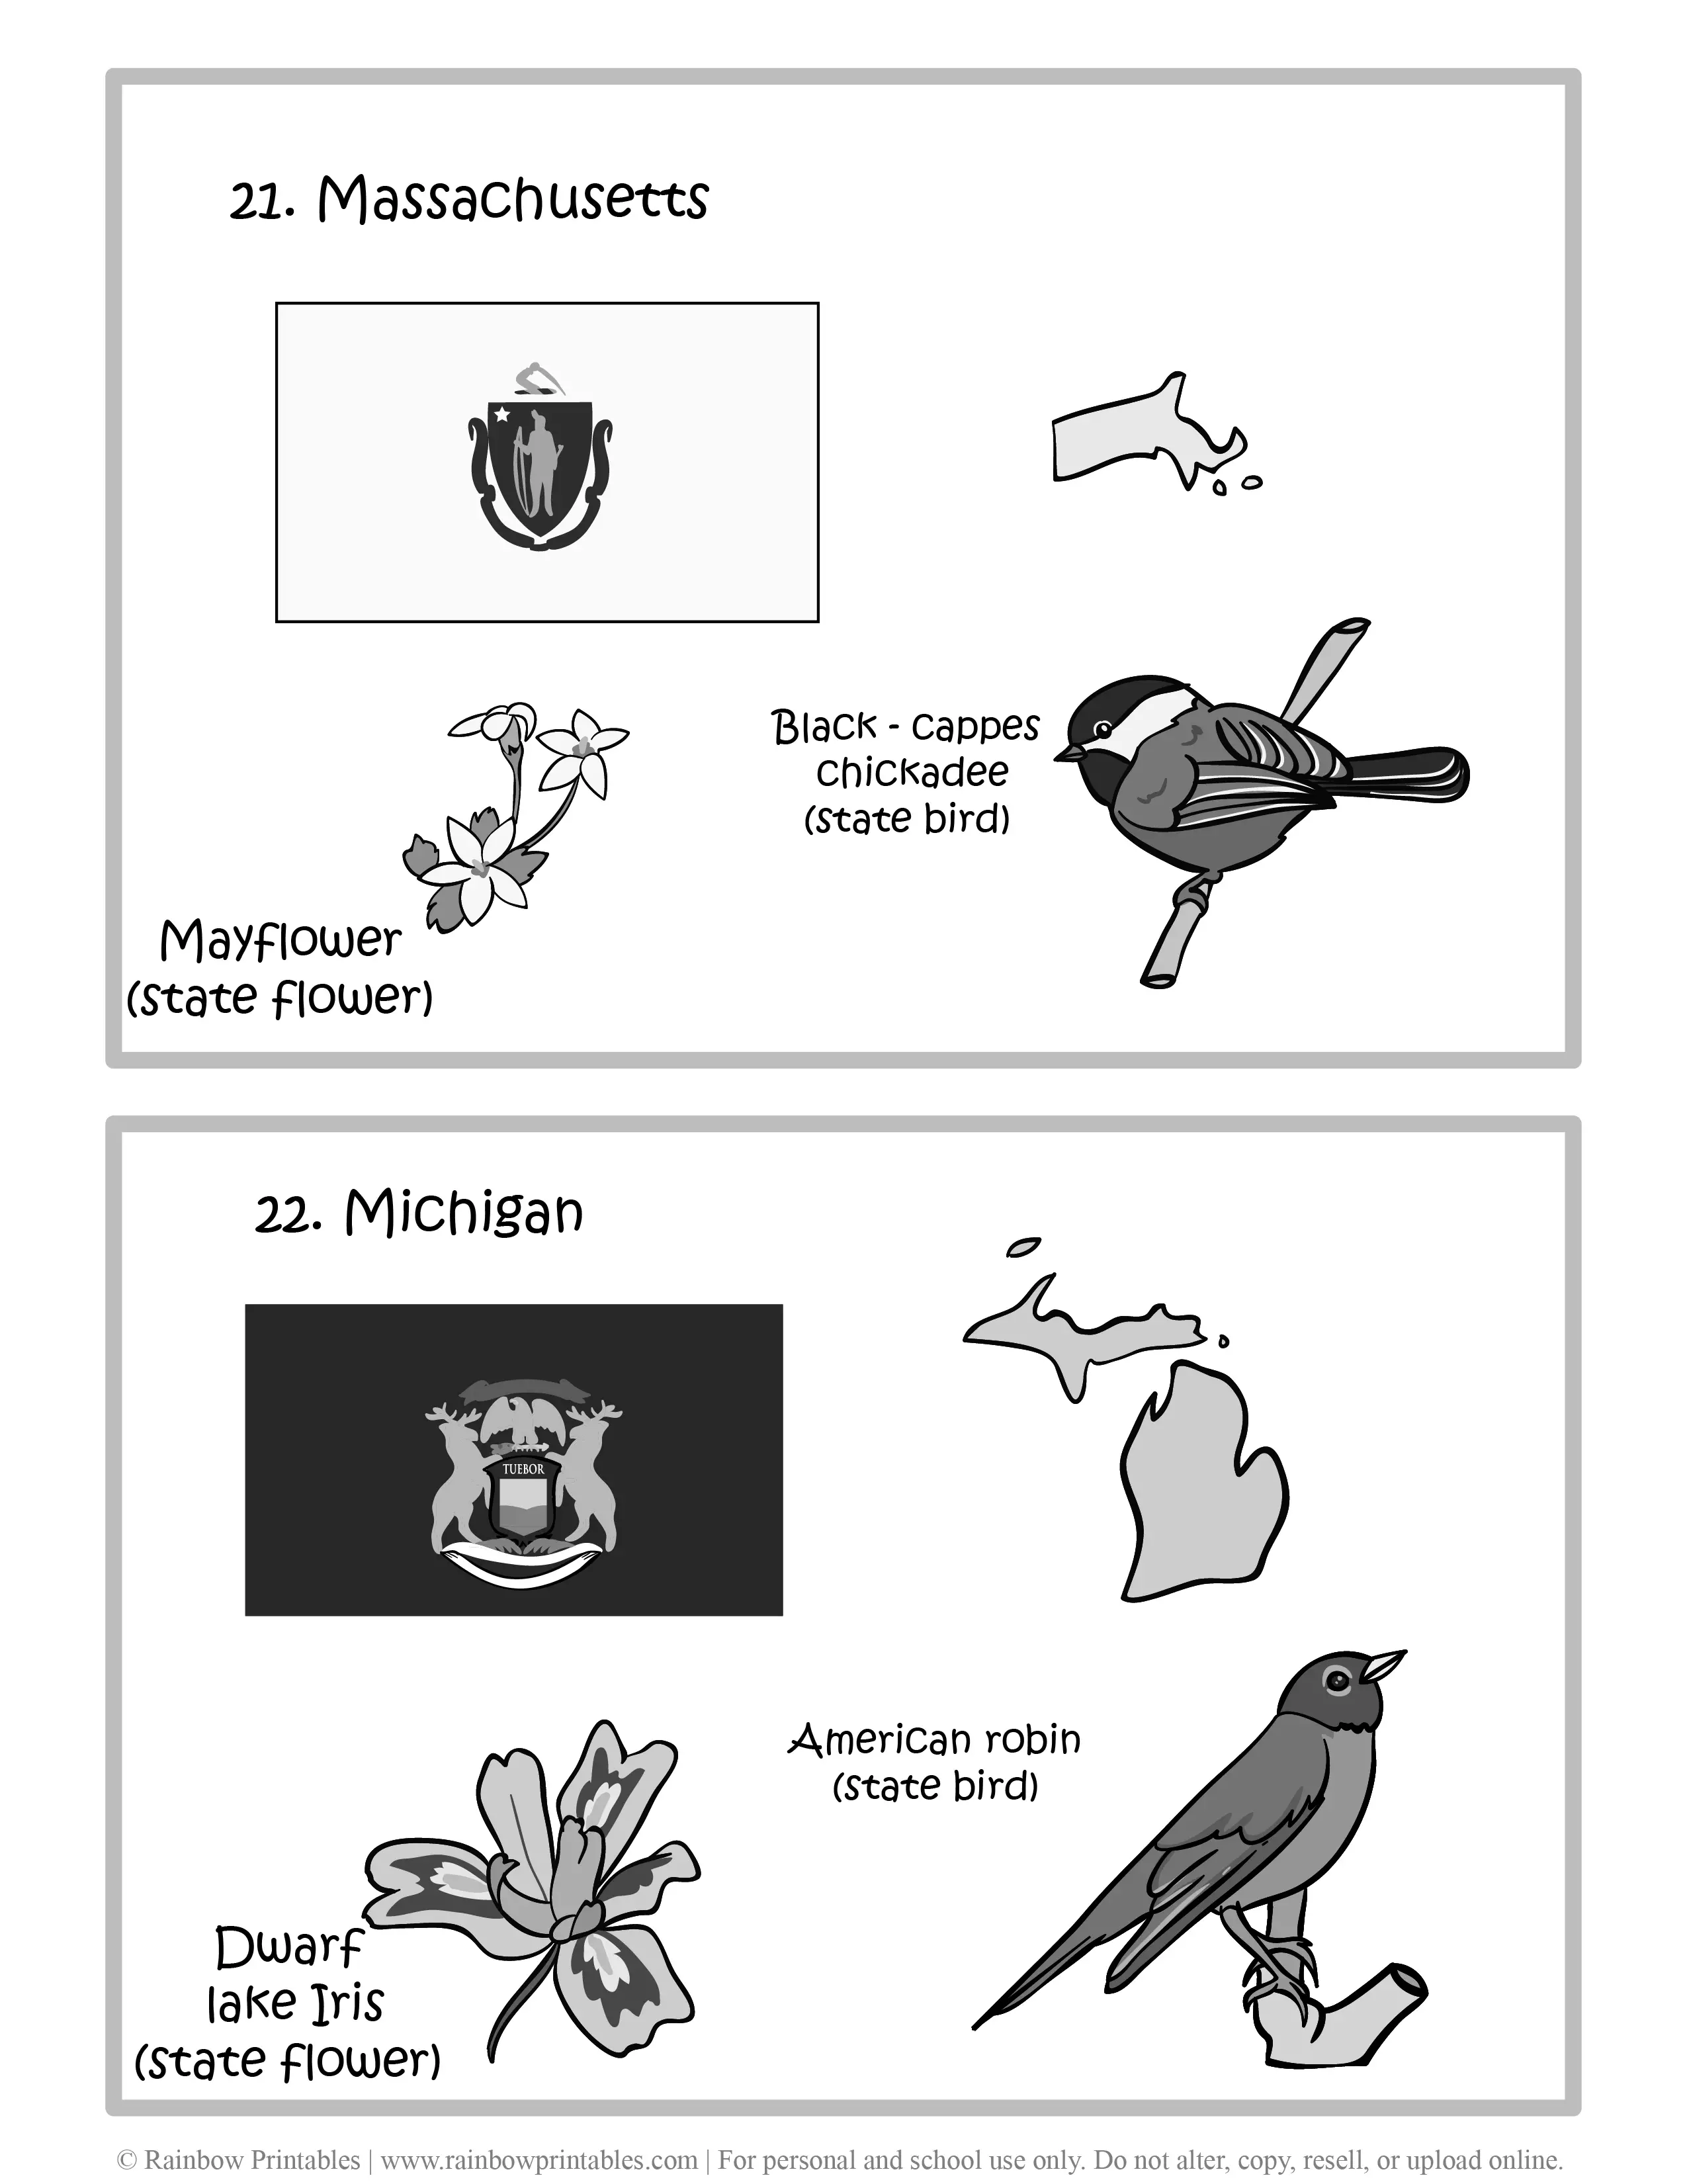 Massachusetts, Michigan, 50 US State Flag, State Bird, State Flower, United States of America - American States Geography Worksheet Class Lesson Printables Flashcards Black White